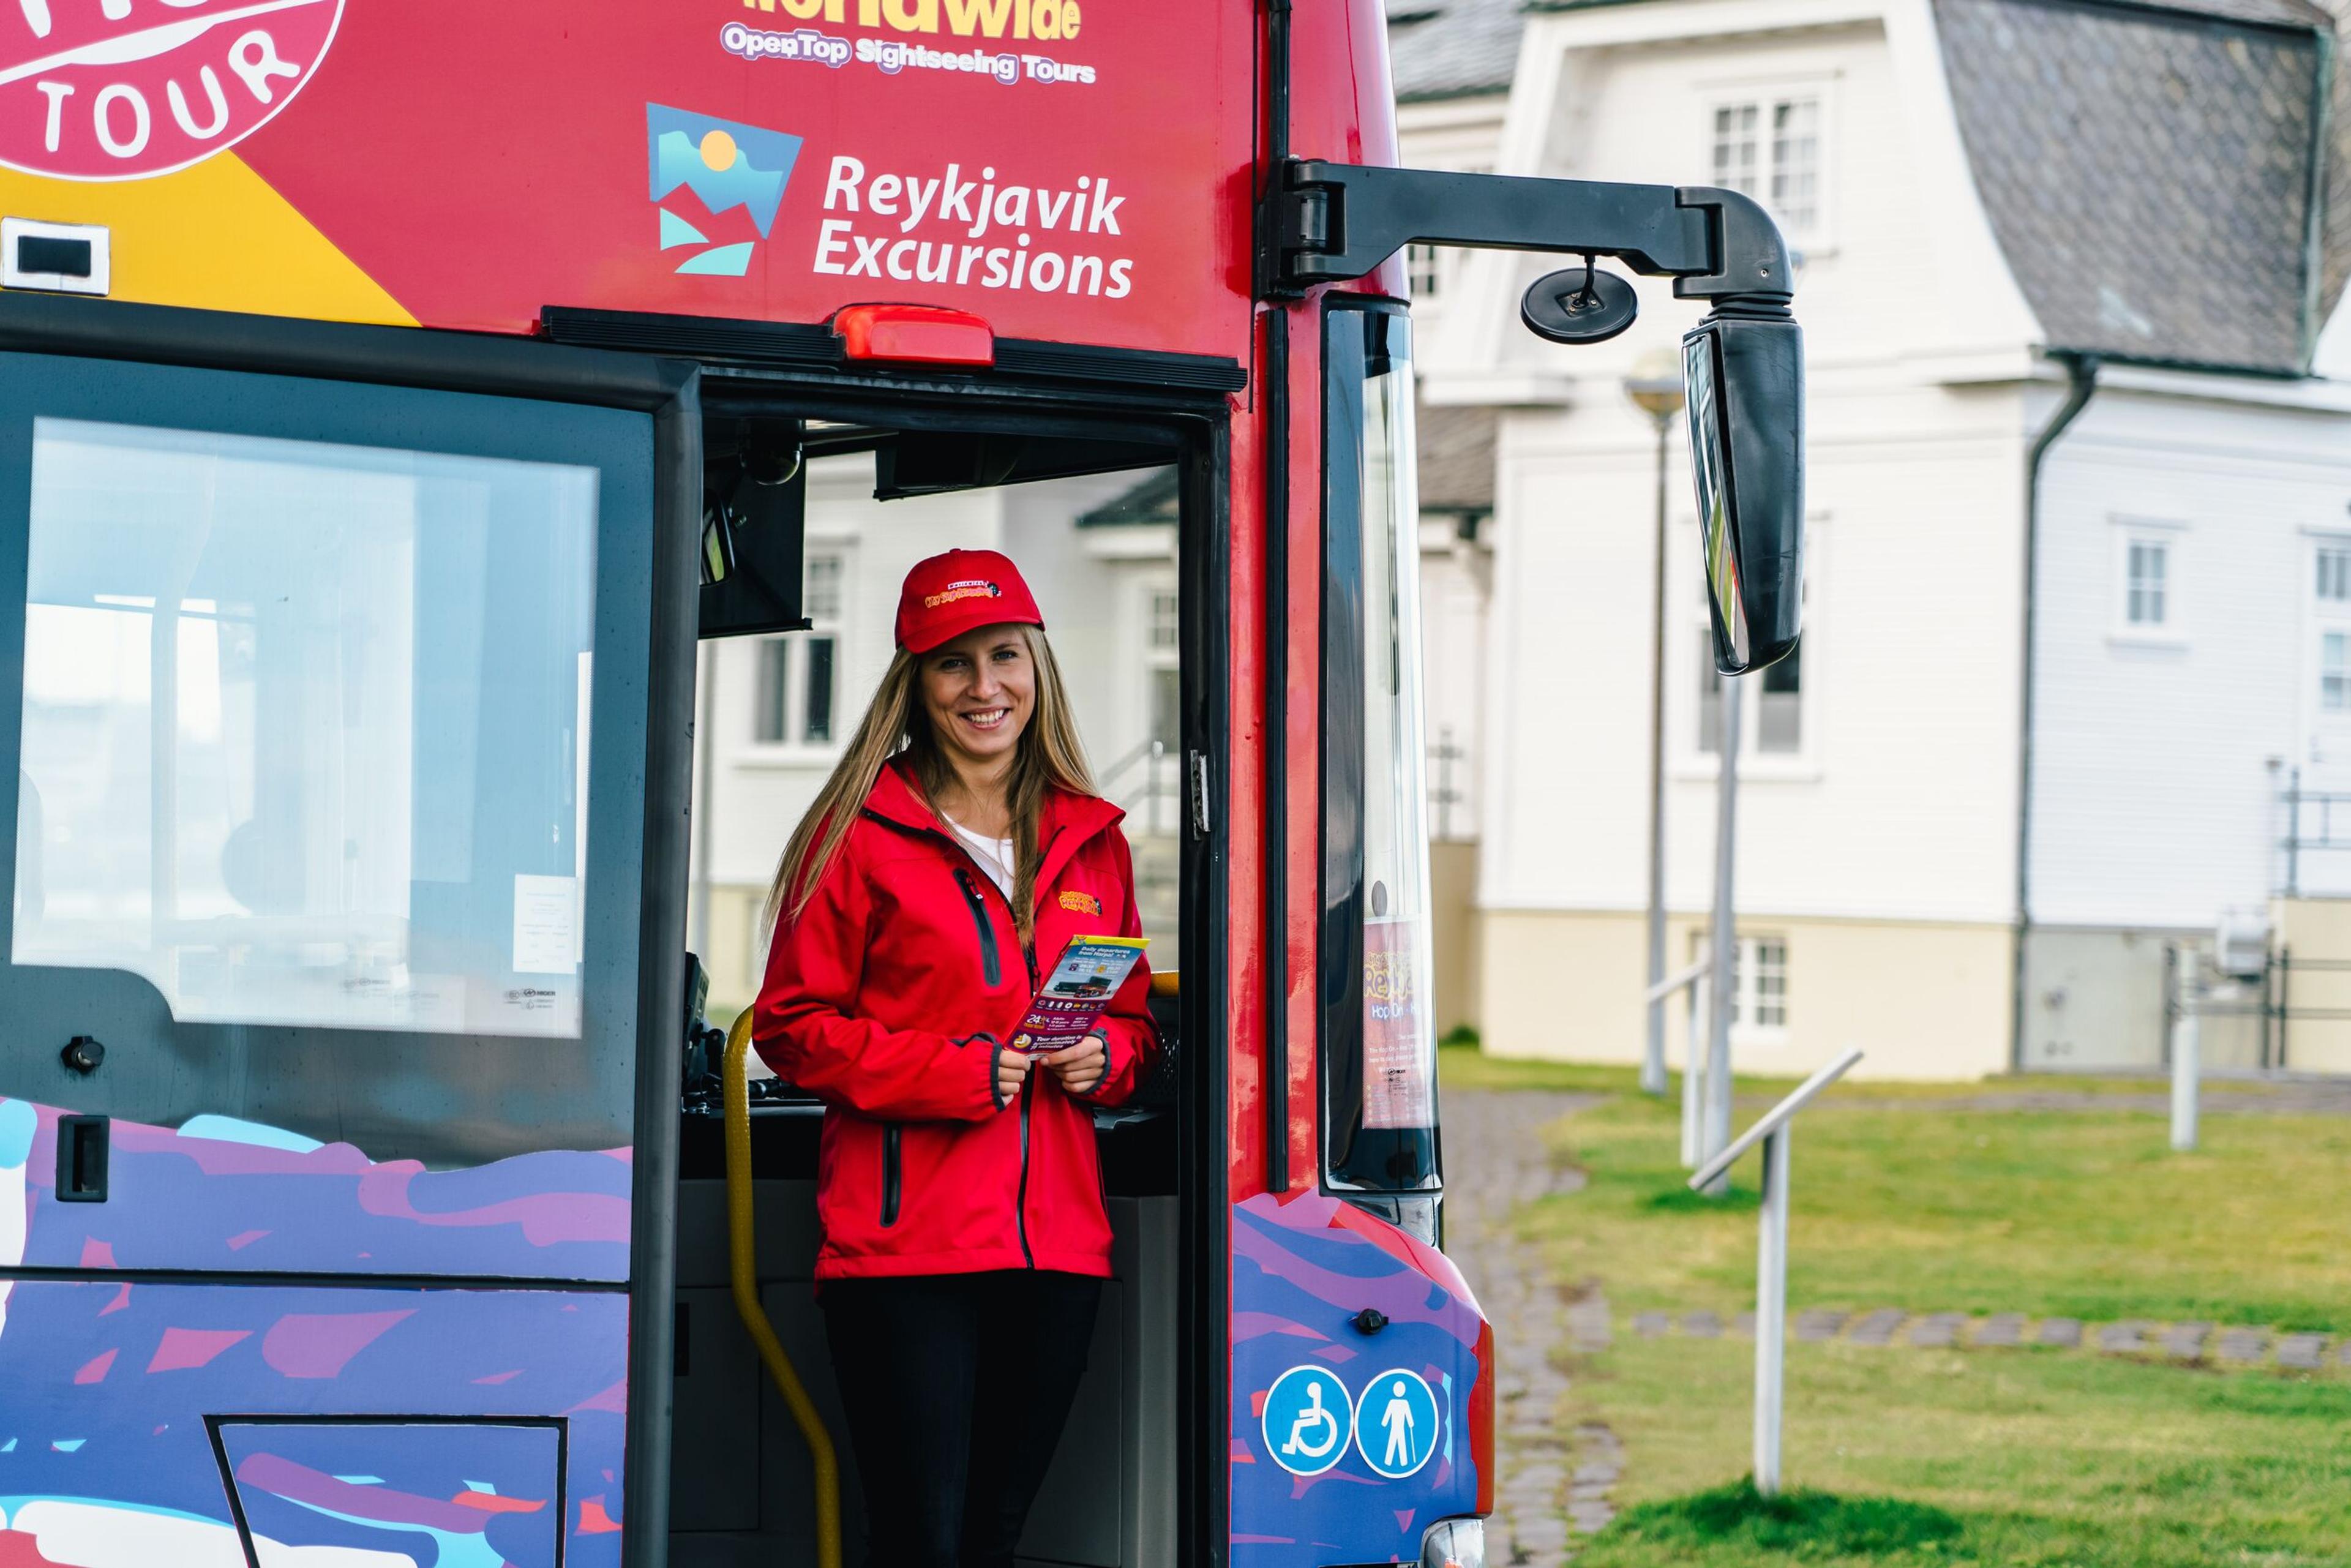 A bus driver welcoming people on board of a Sightseeing tour in Reykjavík, Iceland.